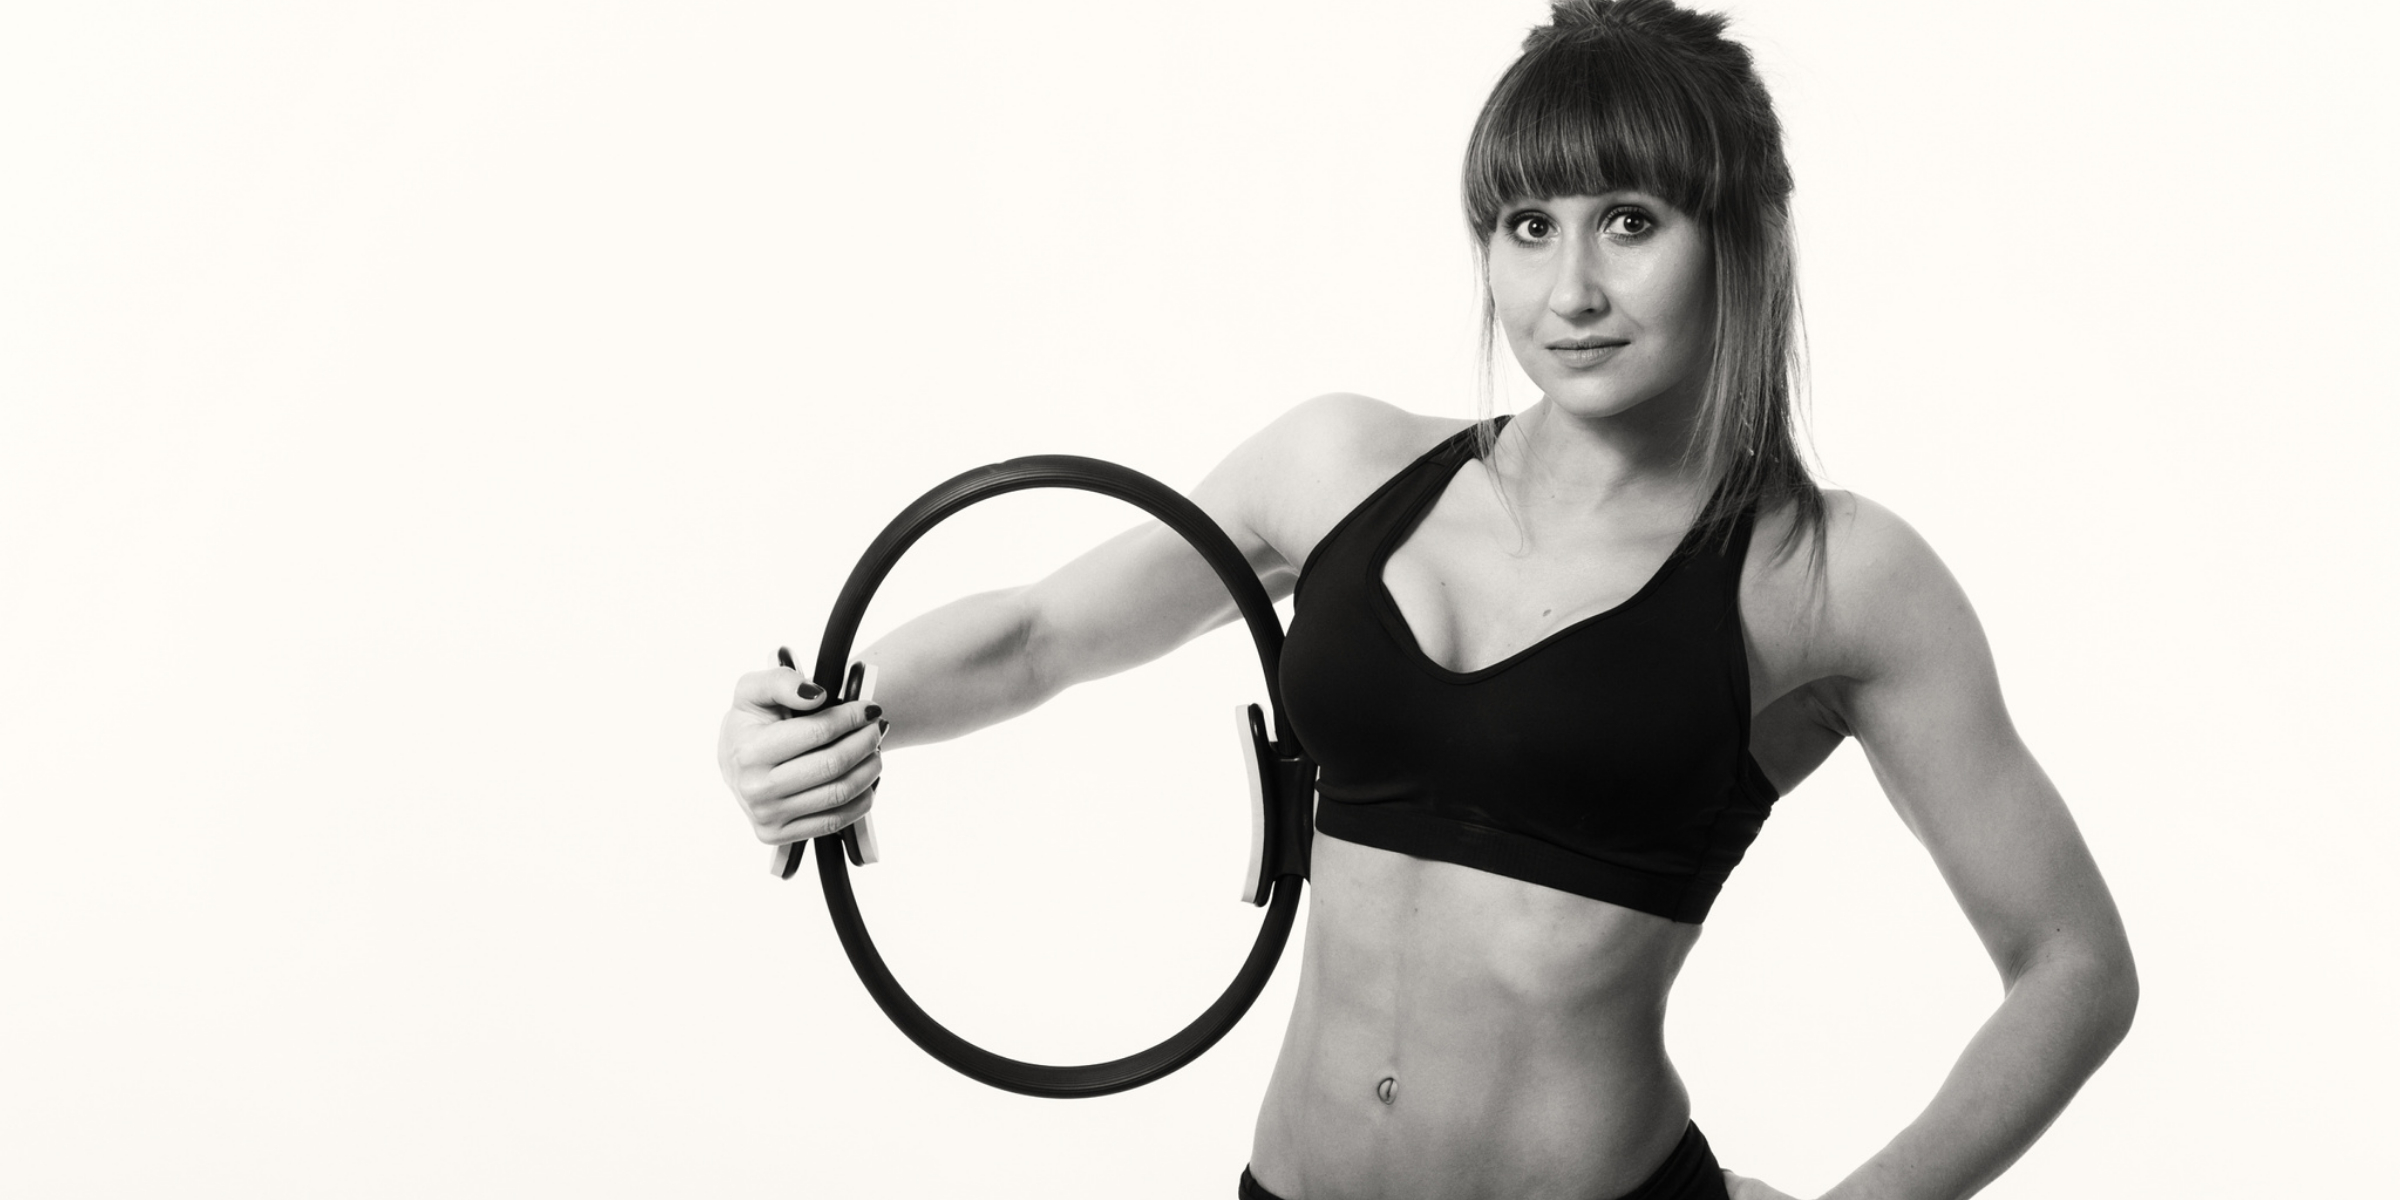 A woman is holding a Pilates ring.